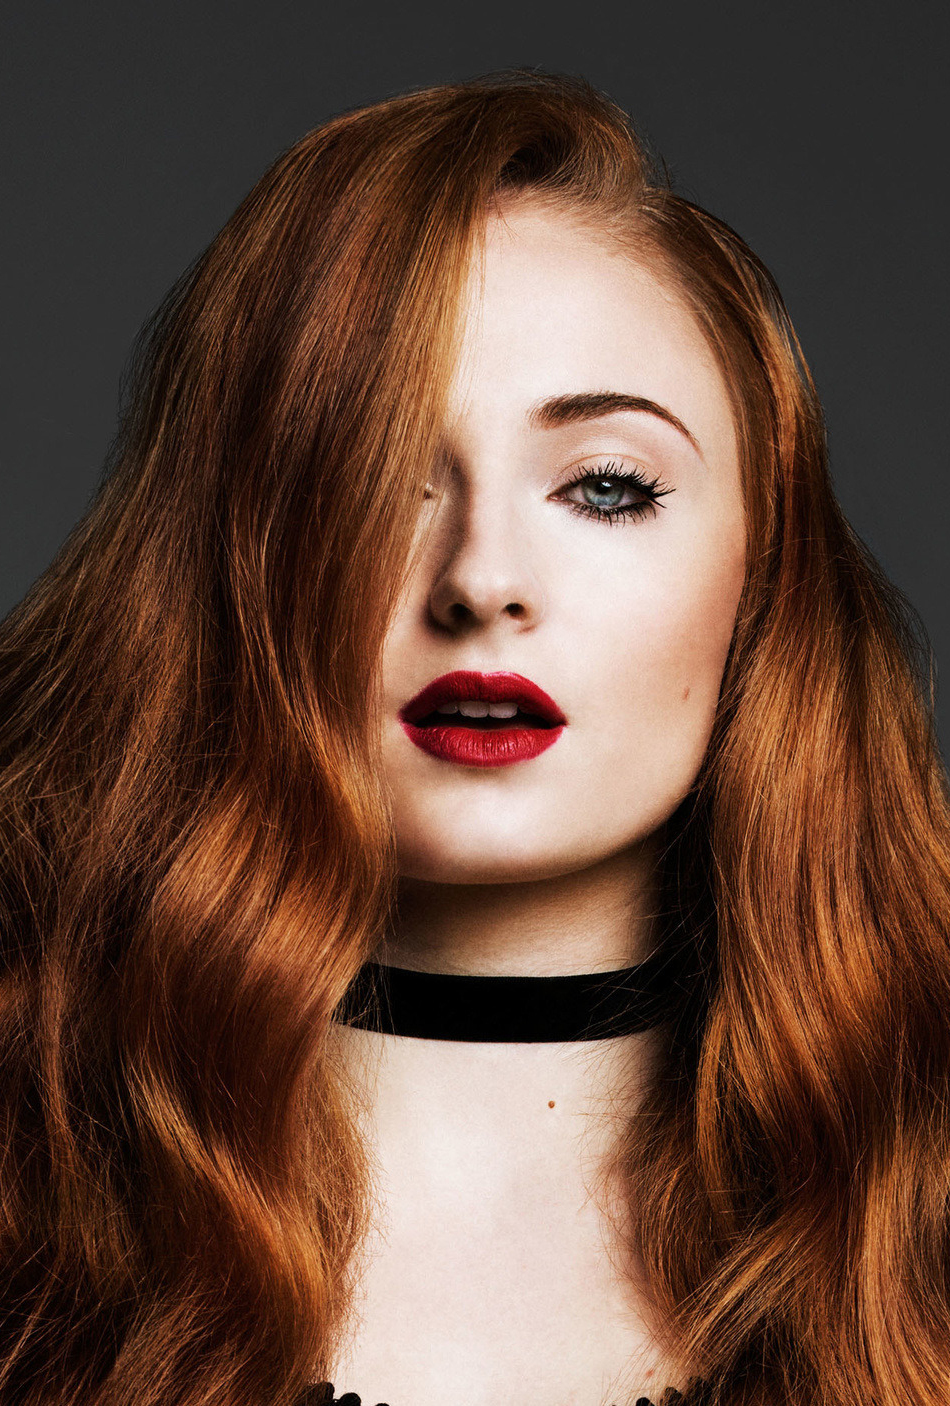 Download wallpaper 950x1534 sophie turner, red head, popular celebrity,  iphone, 950x1534 hd background, 2902